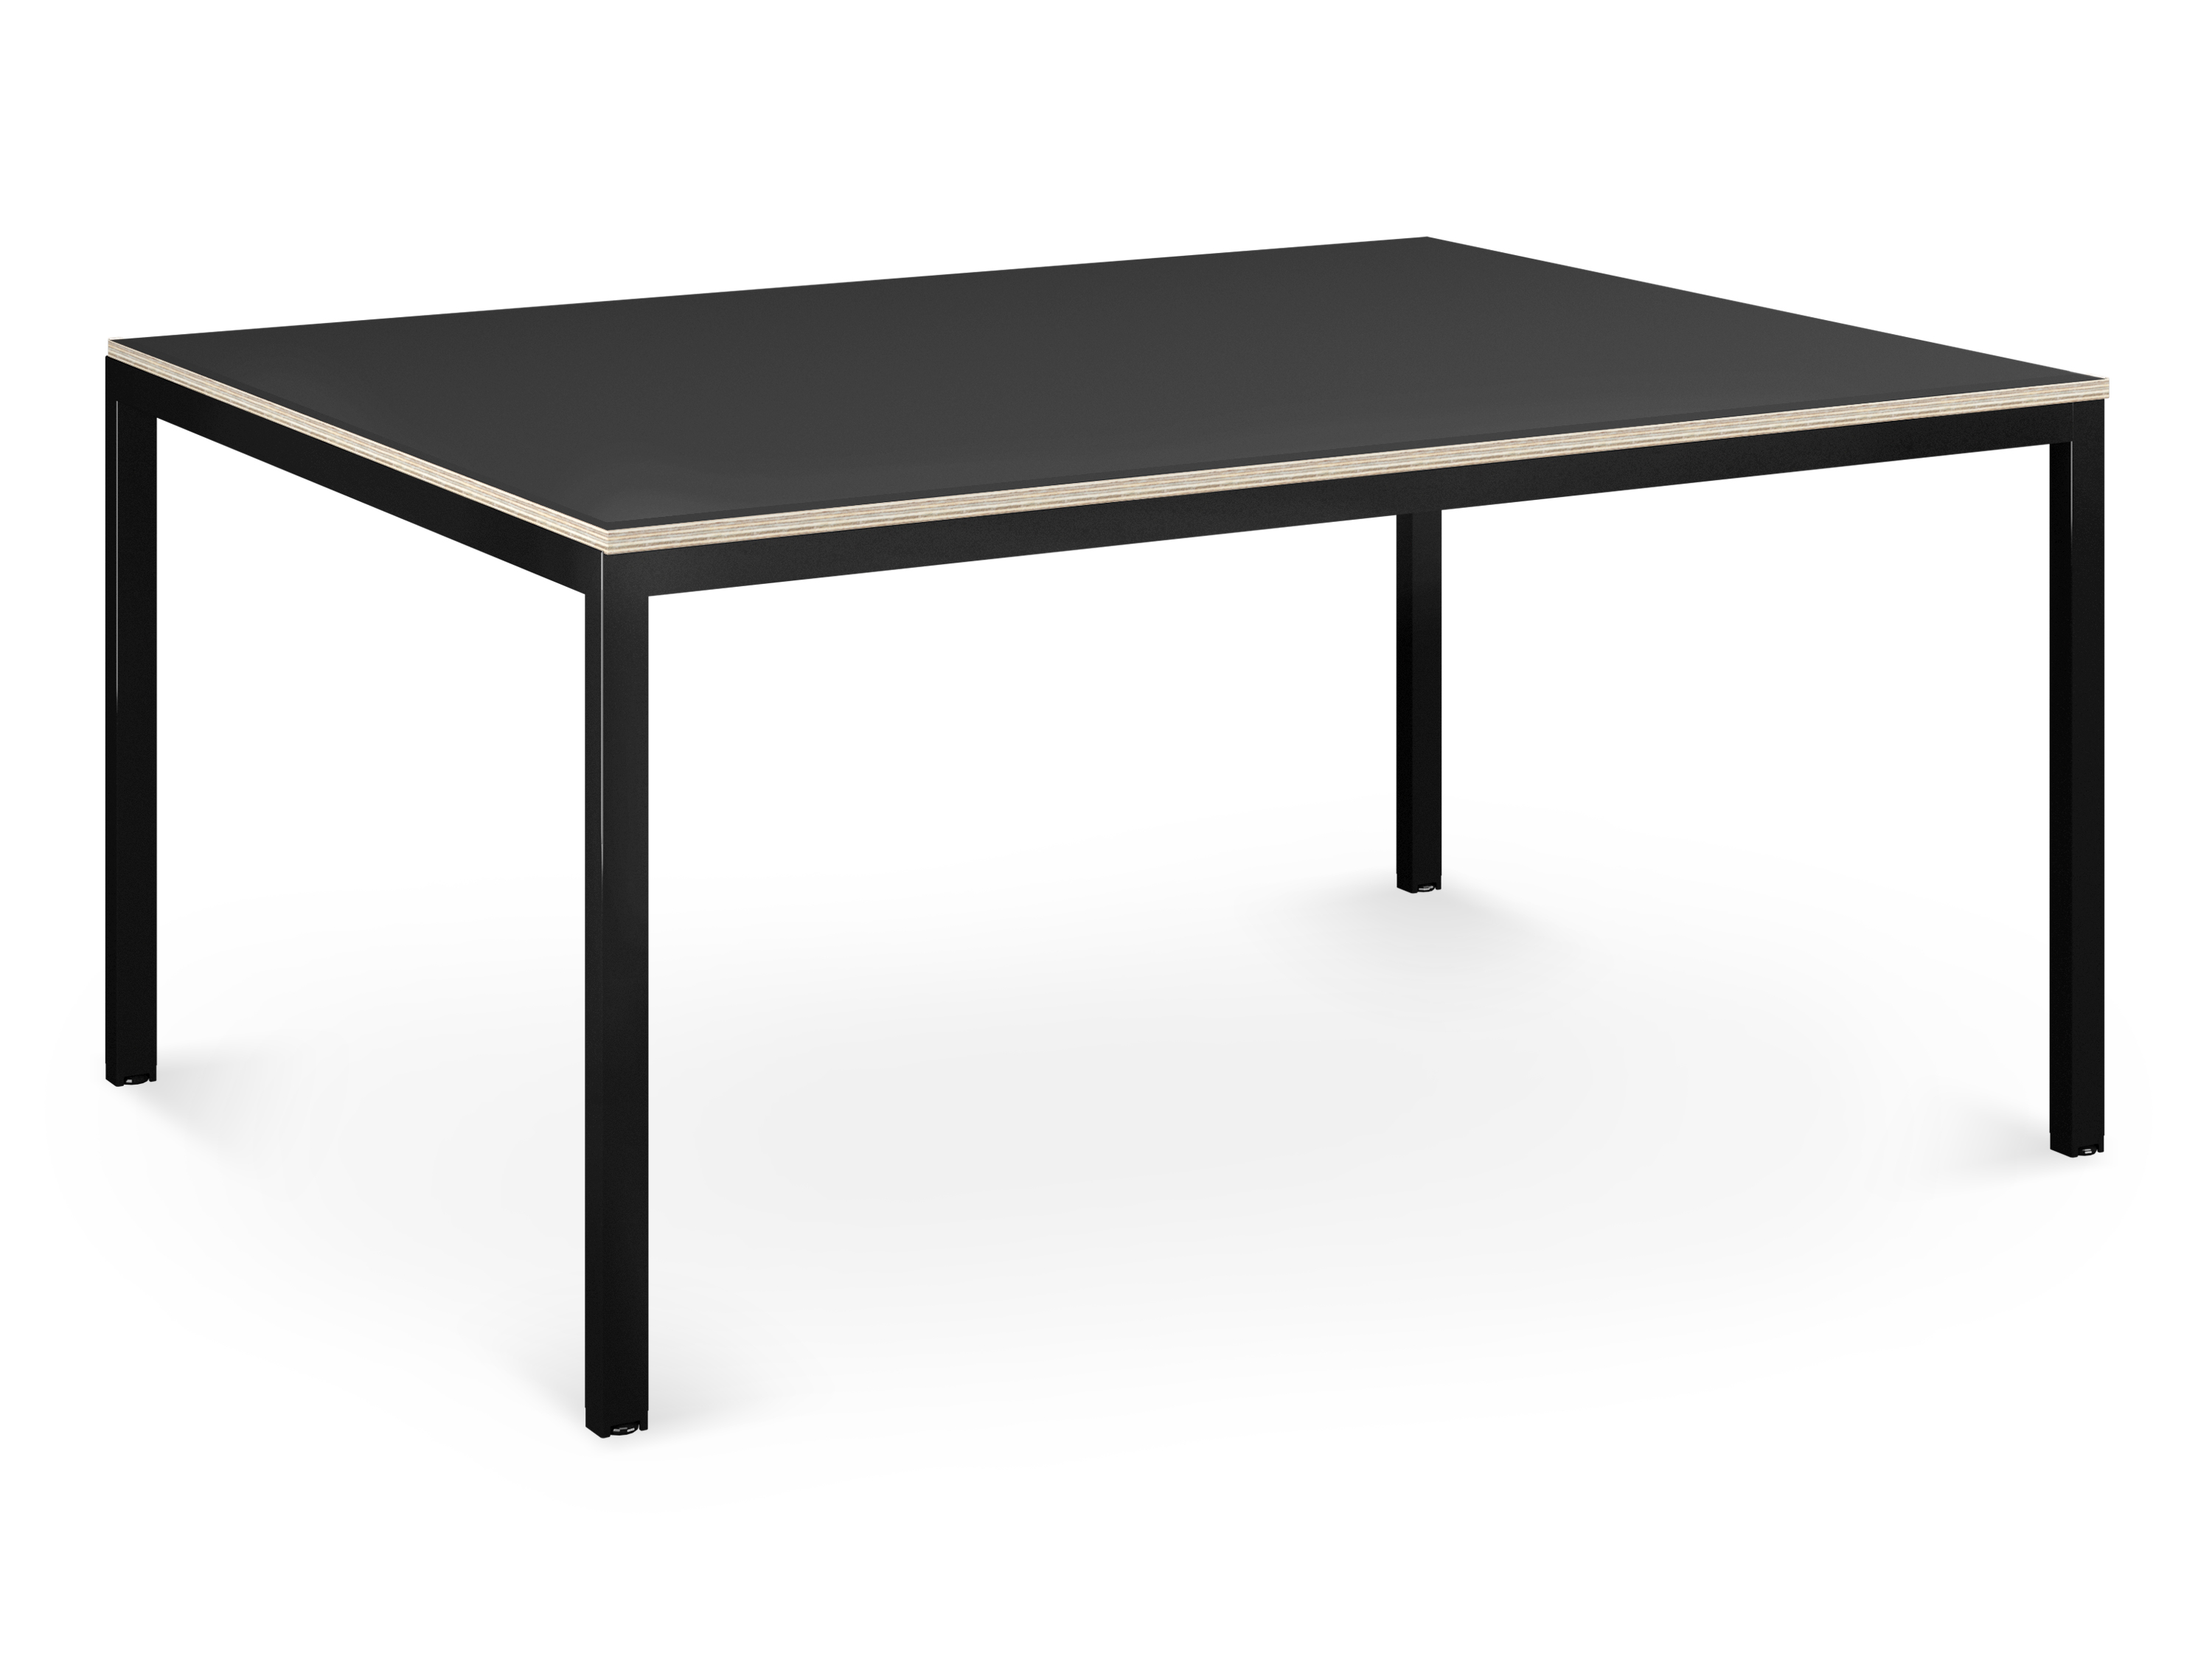 WS -Co.Stories desk - 1380 x 1380 - Black Frame, Black top with ply edge